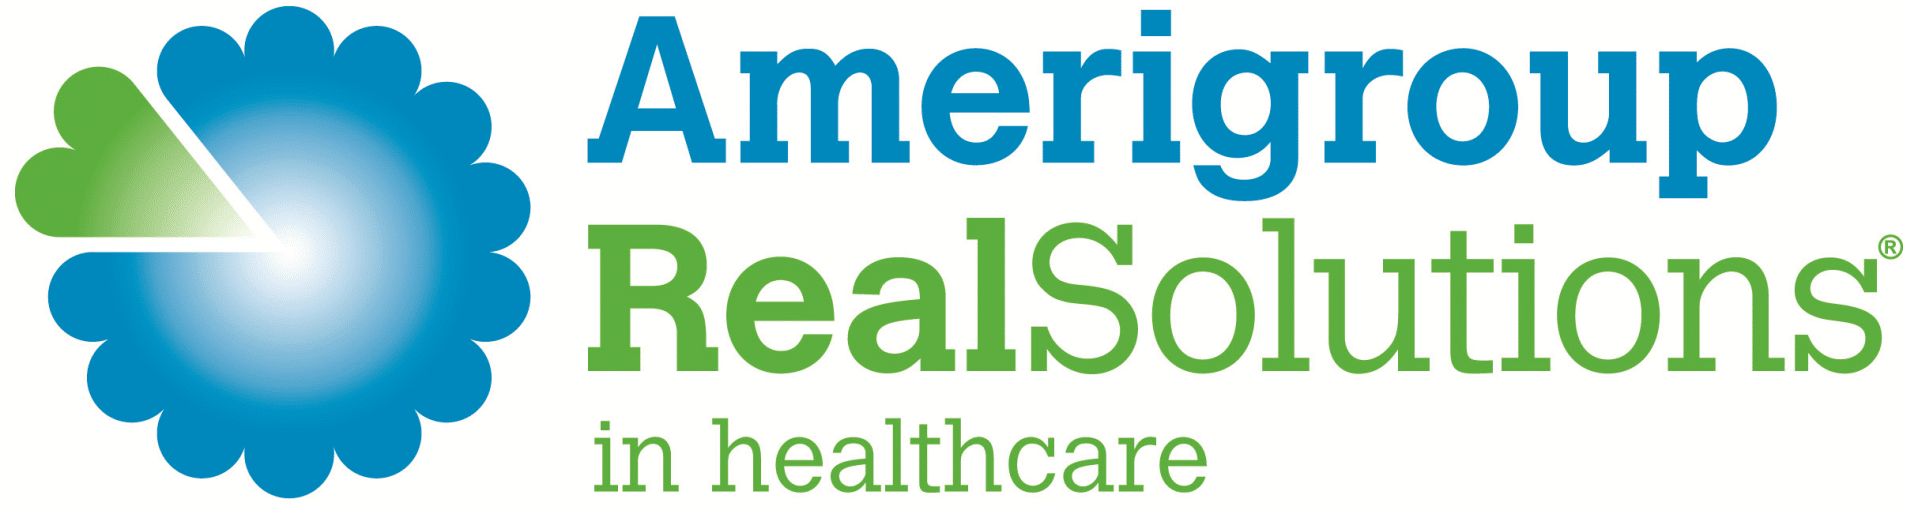 Does amerigroup cover find a doctor caresource ohio